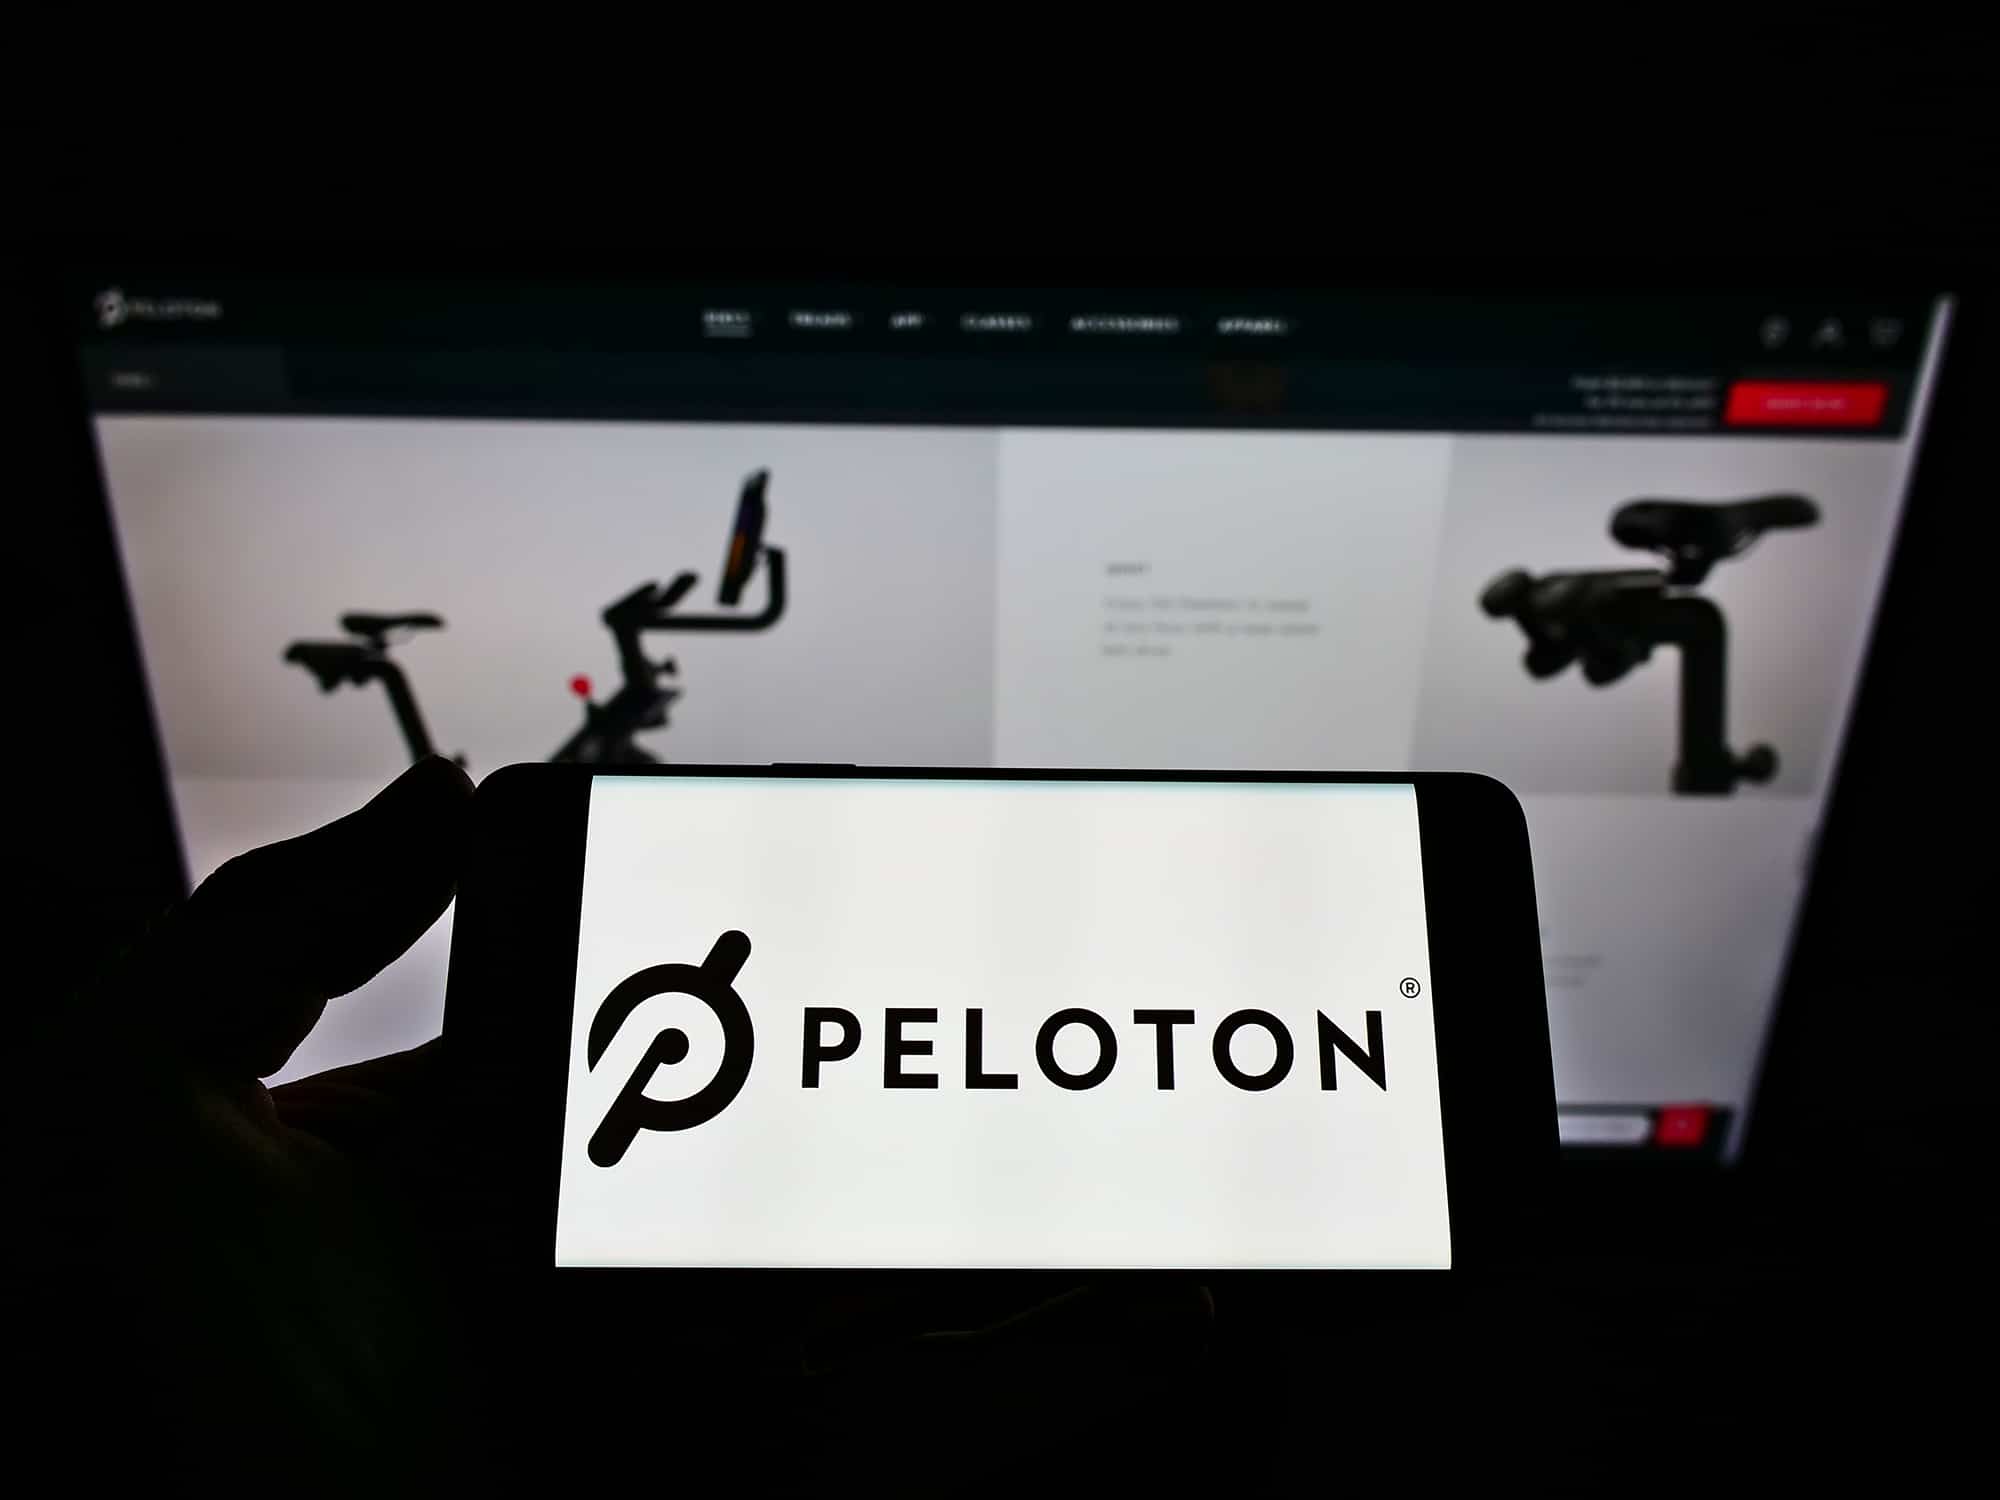 Peloton announces layoffs of 400 employees, CEO to step down